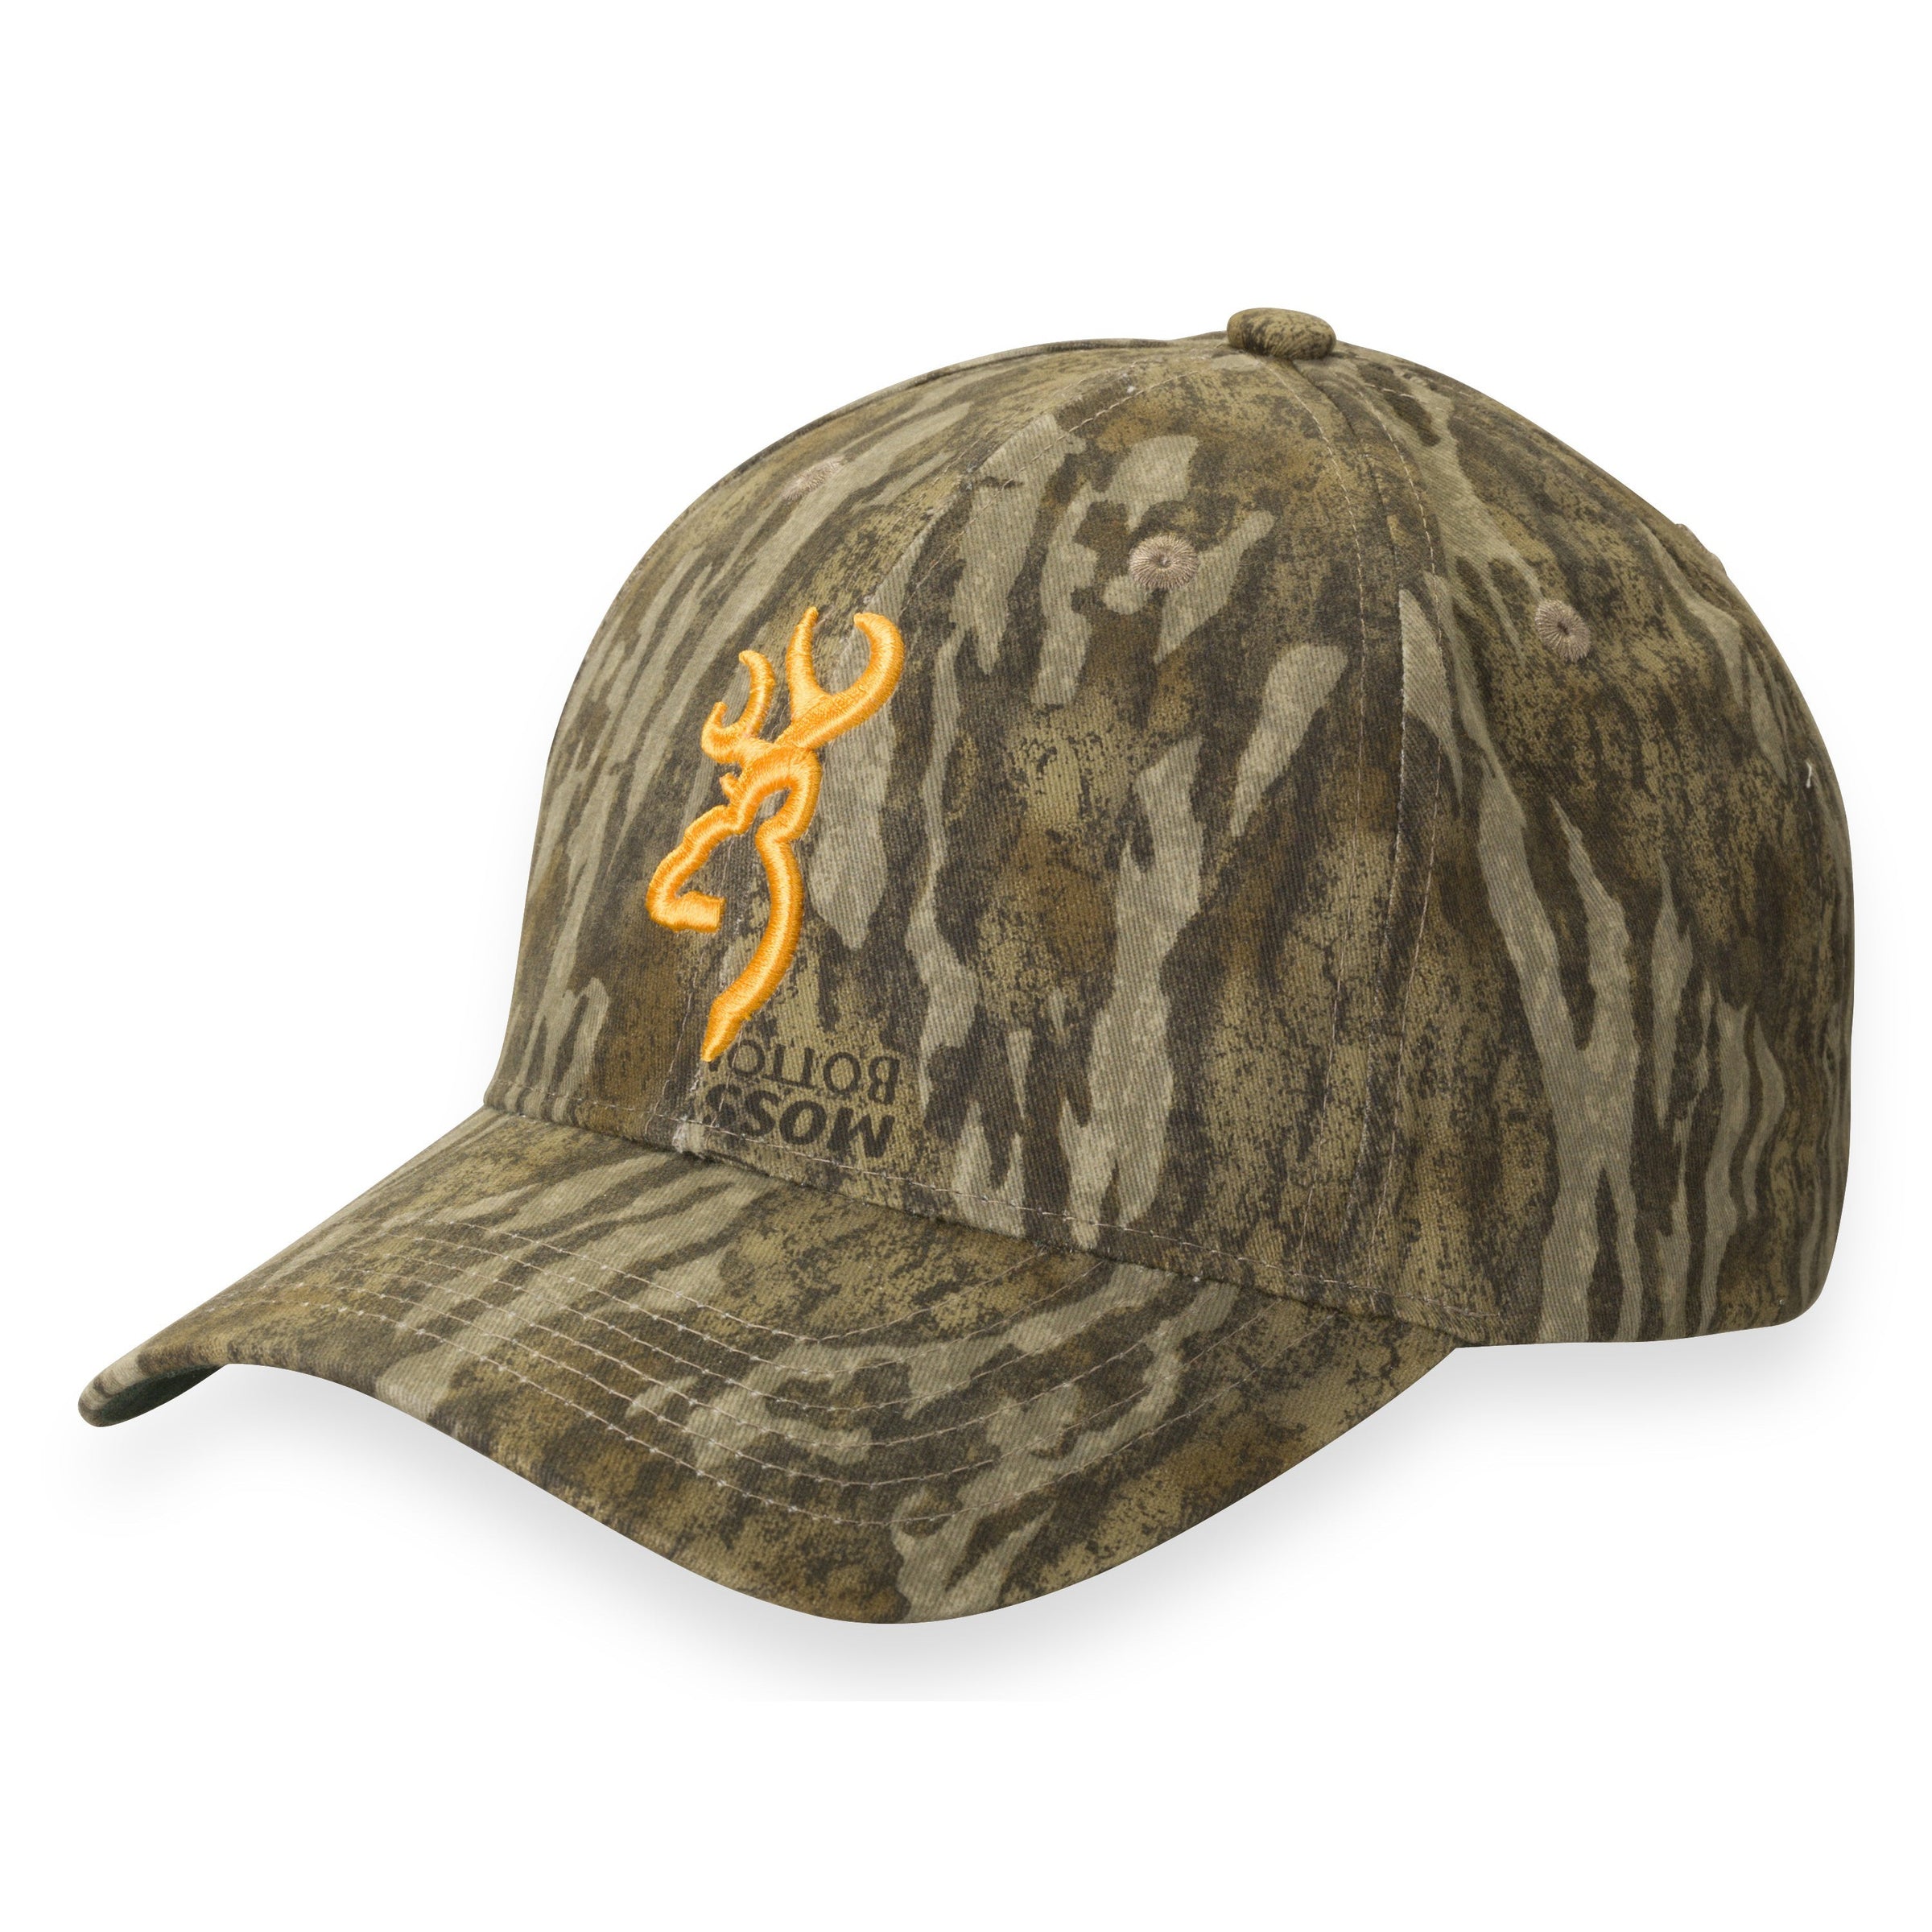 Browning Rimfire Cap-Men's Accessories-Bottomland-ONE SIZE-Kevin's Fine Outdoor Gear & Apparel